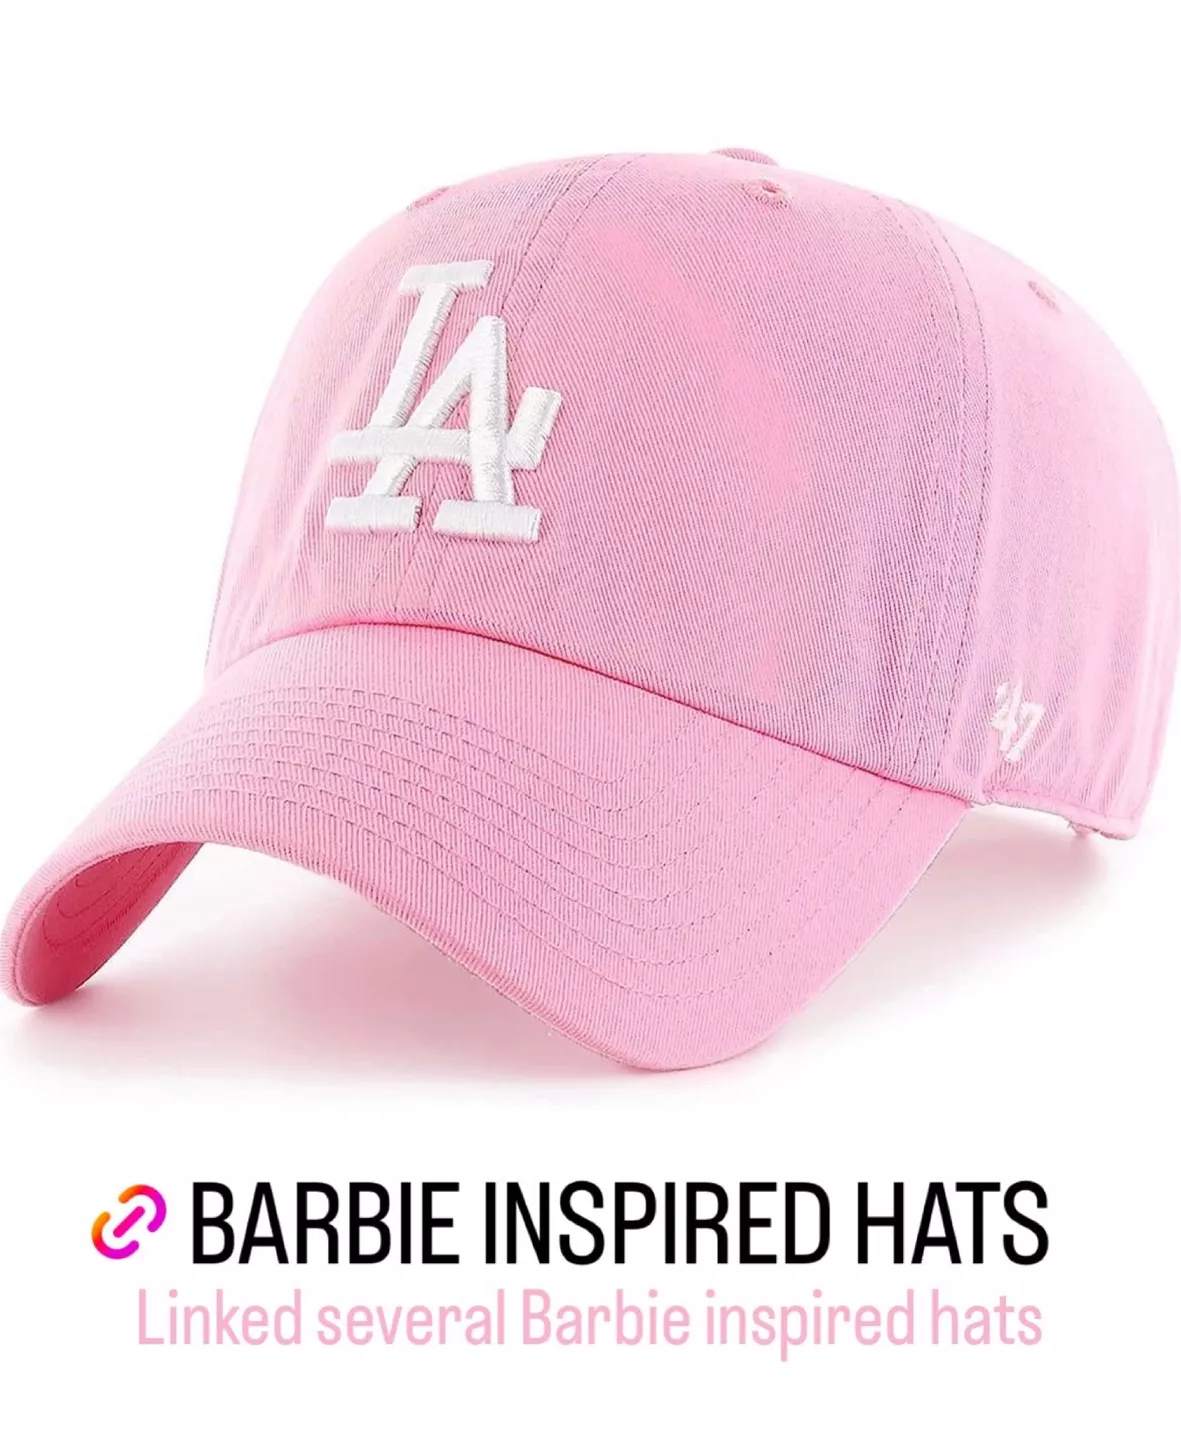 Barbie Hats for Sale